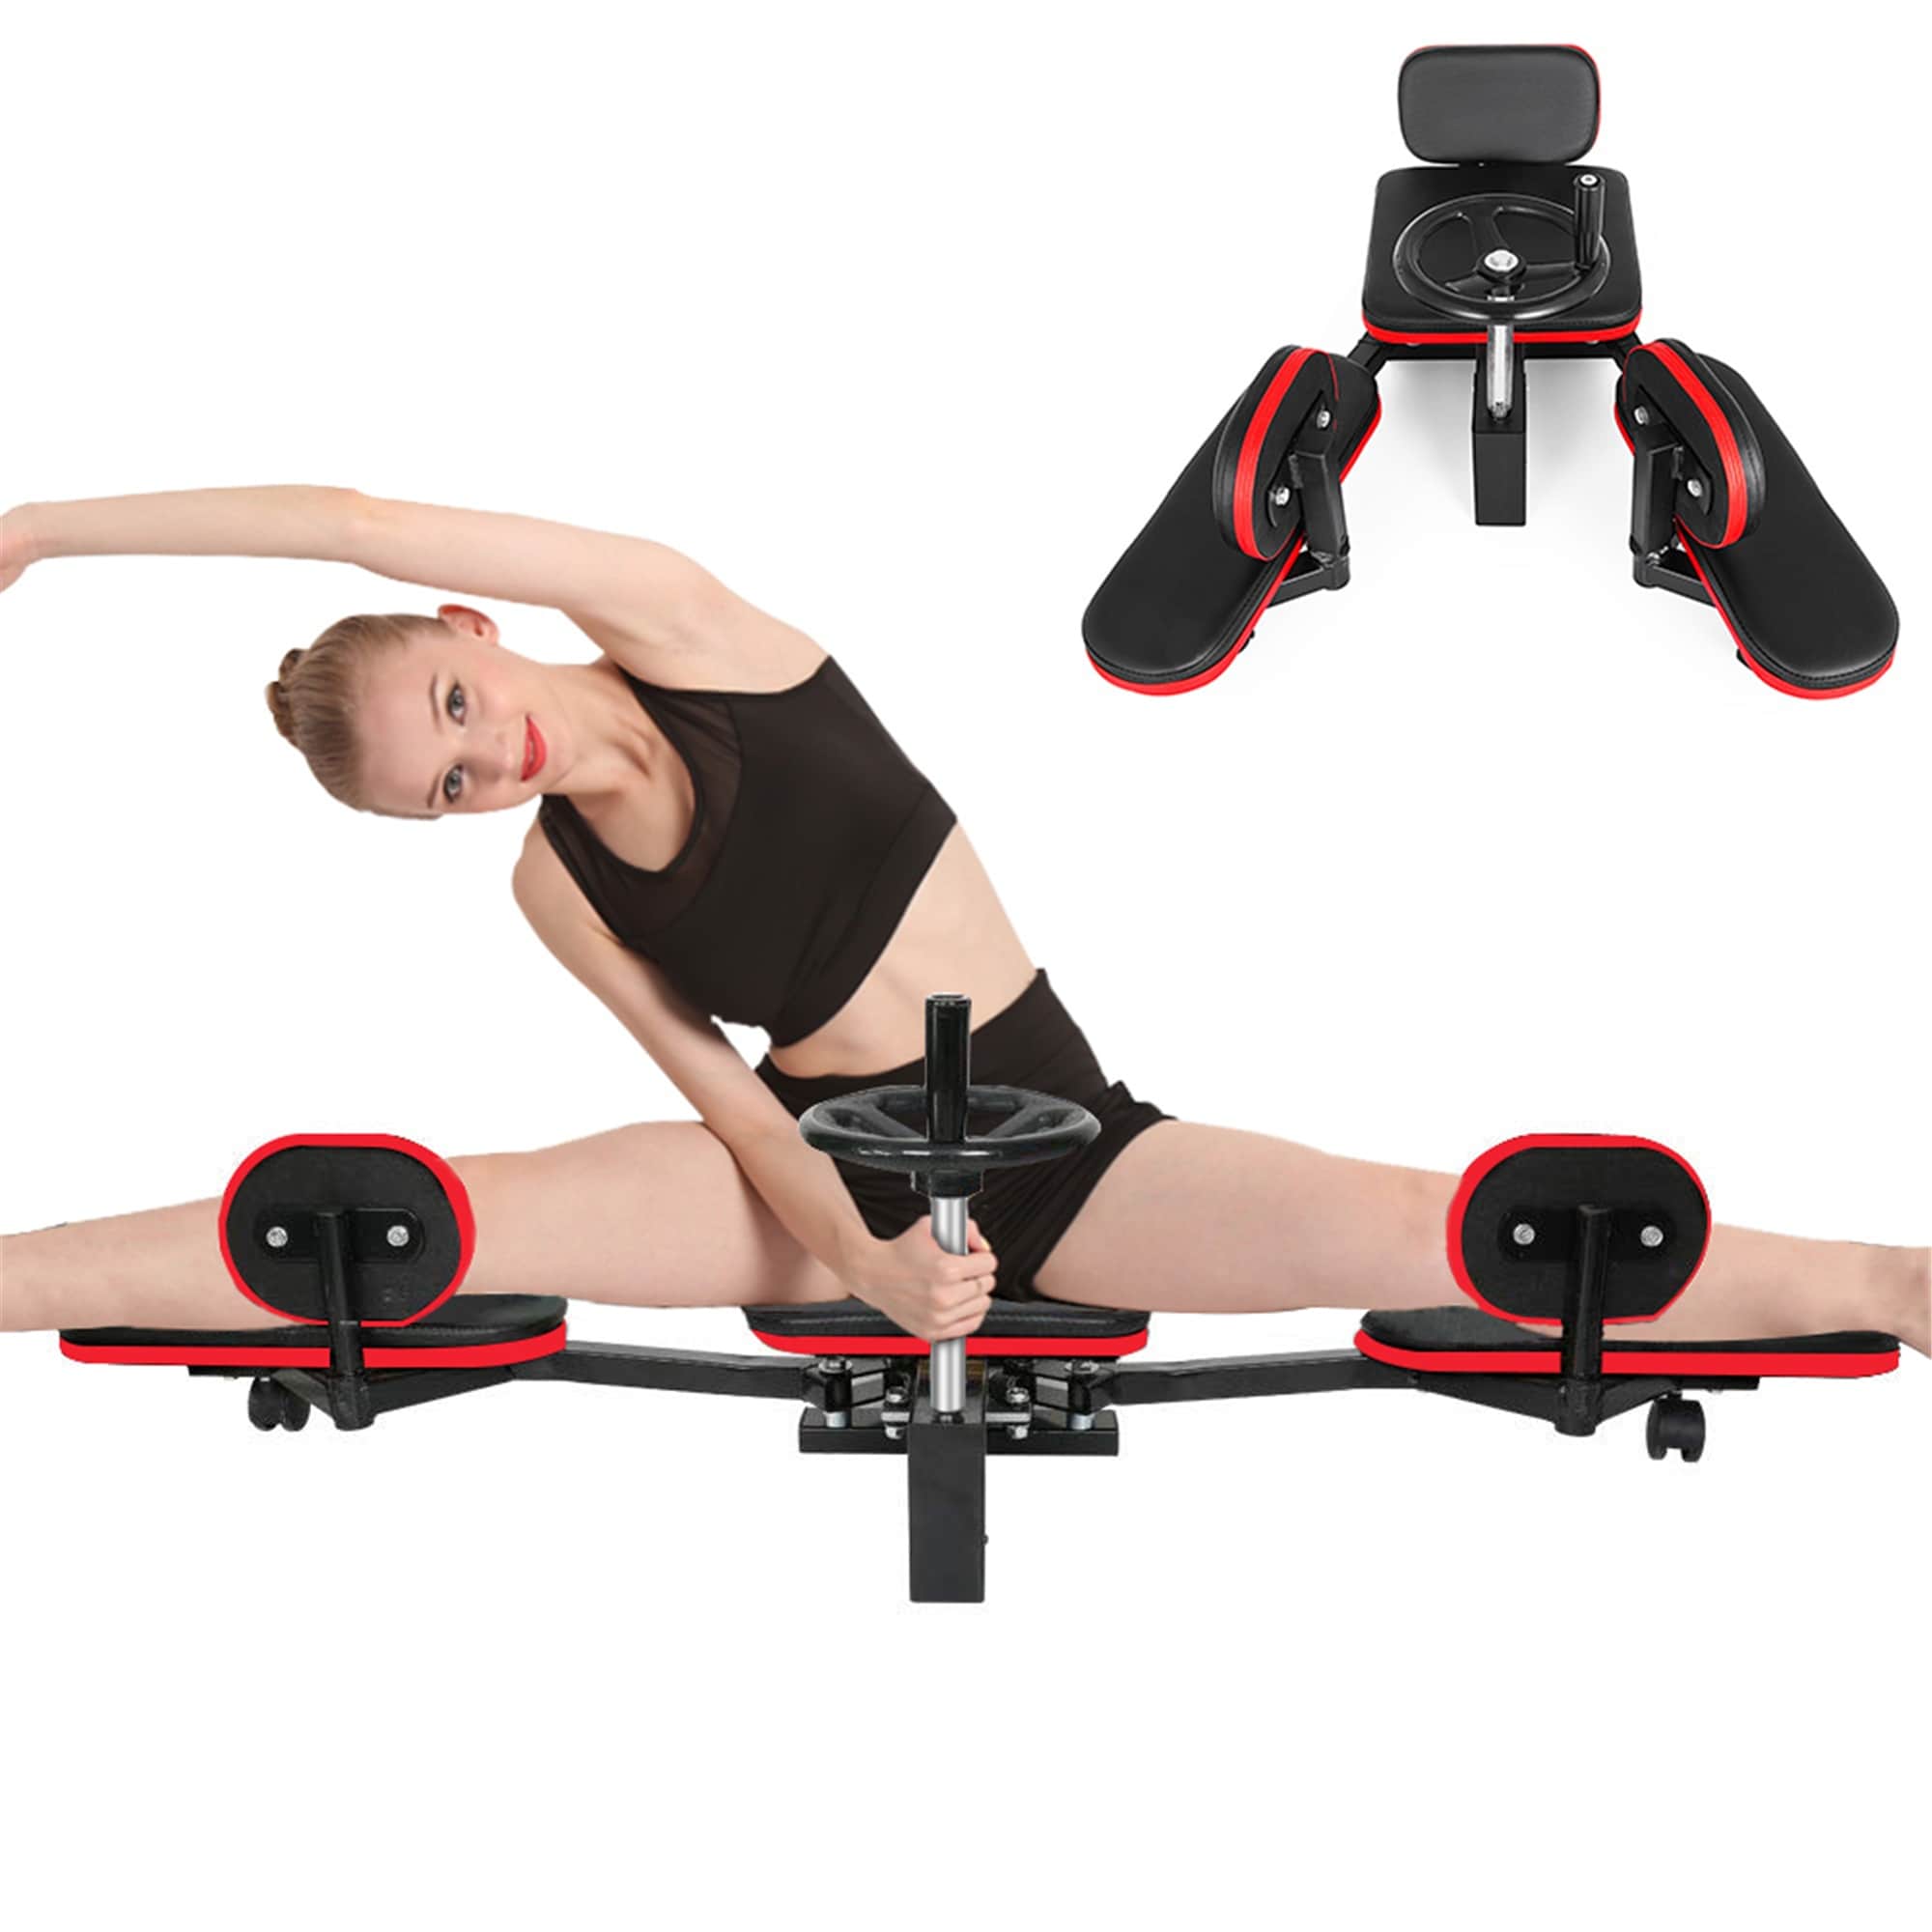 https://ak1.ostkcdn.com/images/products/is/images/direct/e9e451abe2dd3a25b21d6f4cc63e8c9adf9cfe45/Pro-Leg-Stretcher-Machine-330LBS-Leg-Stretch-Training-Heavy-Duty-Stretching-Machine-Gym-Gear-Fitness-Equipment-%28Black-and-Red%29.jpg